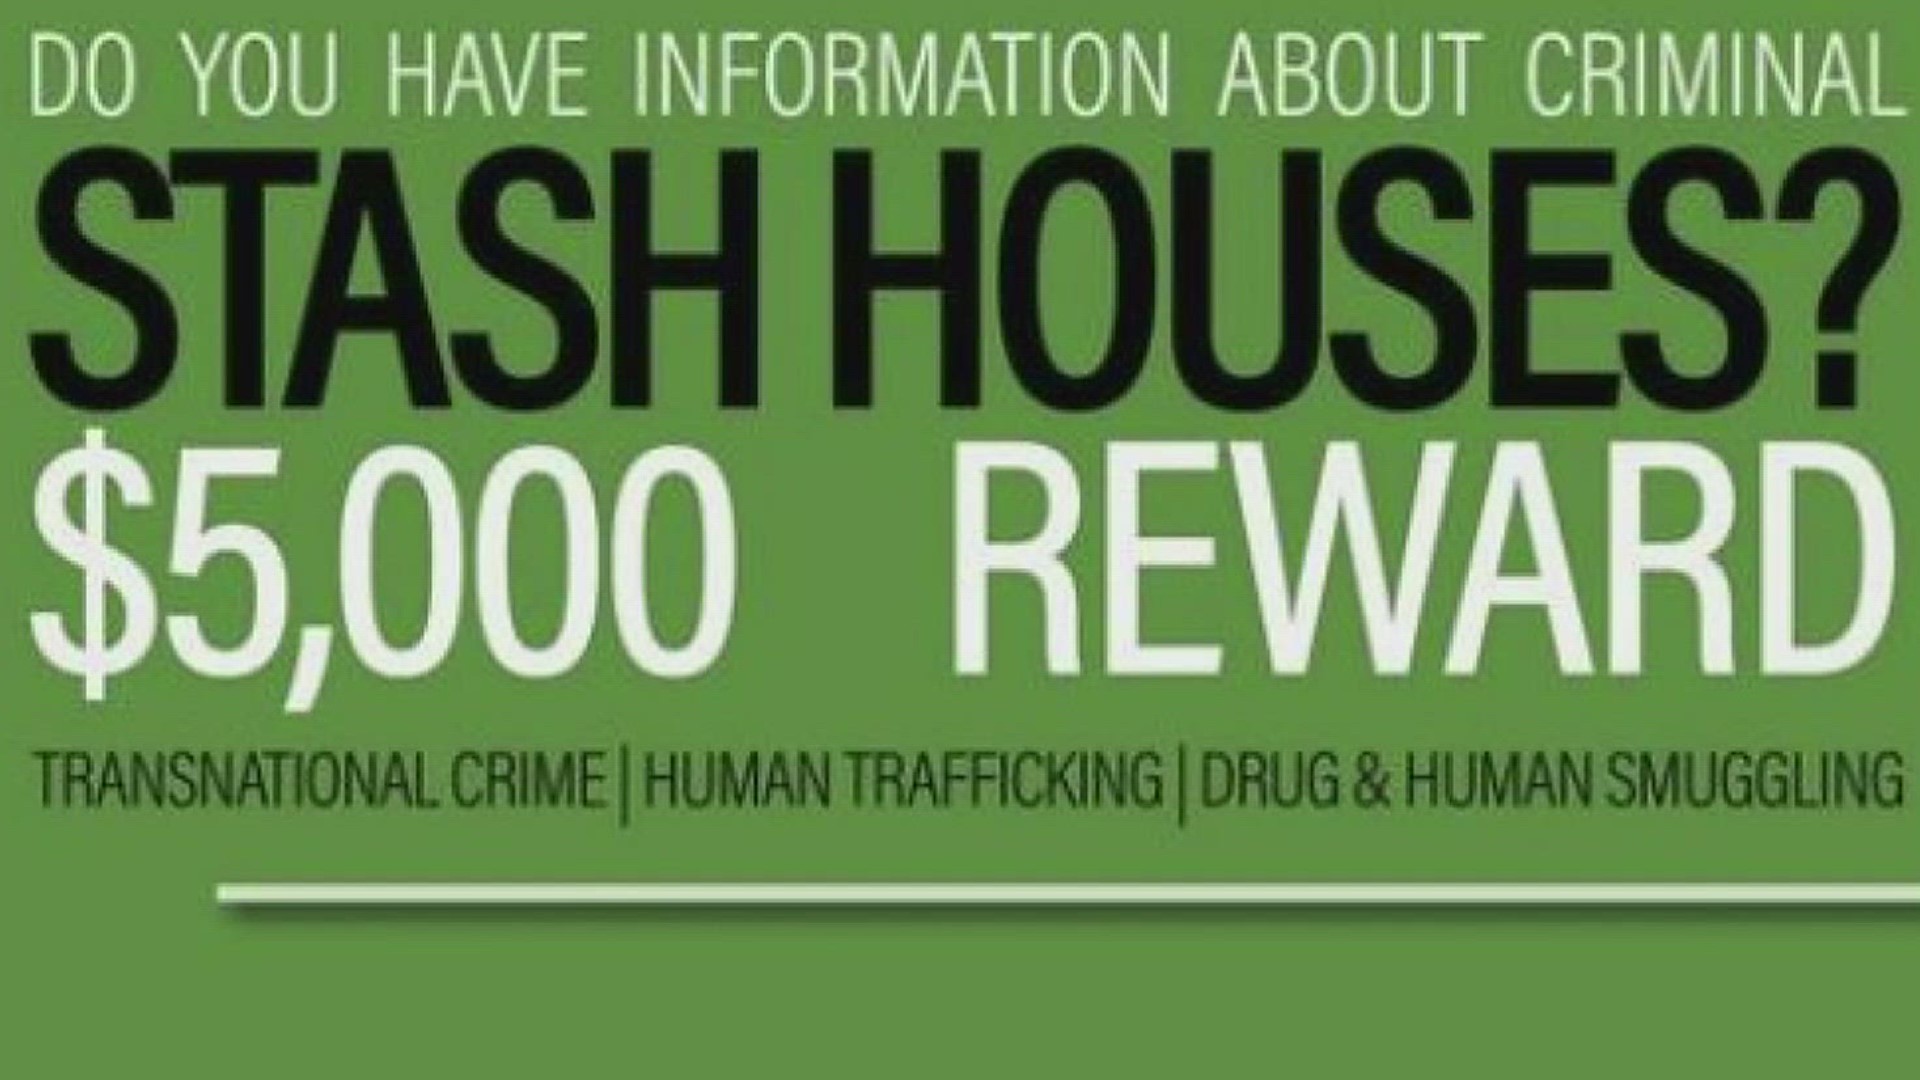 Since 2021 Operation Lone Star has been offering a $5,000 reward to anyone who sends in a good tip on a stash house.